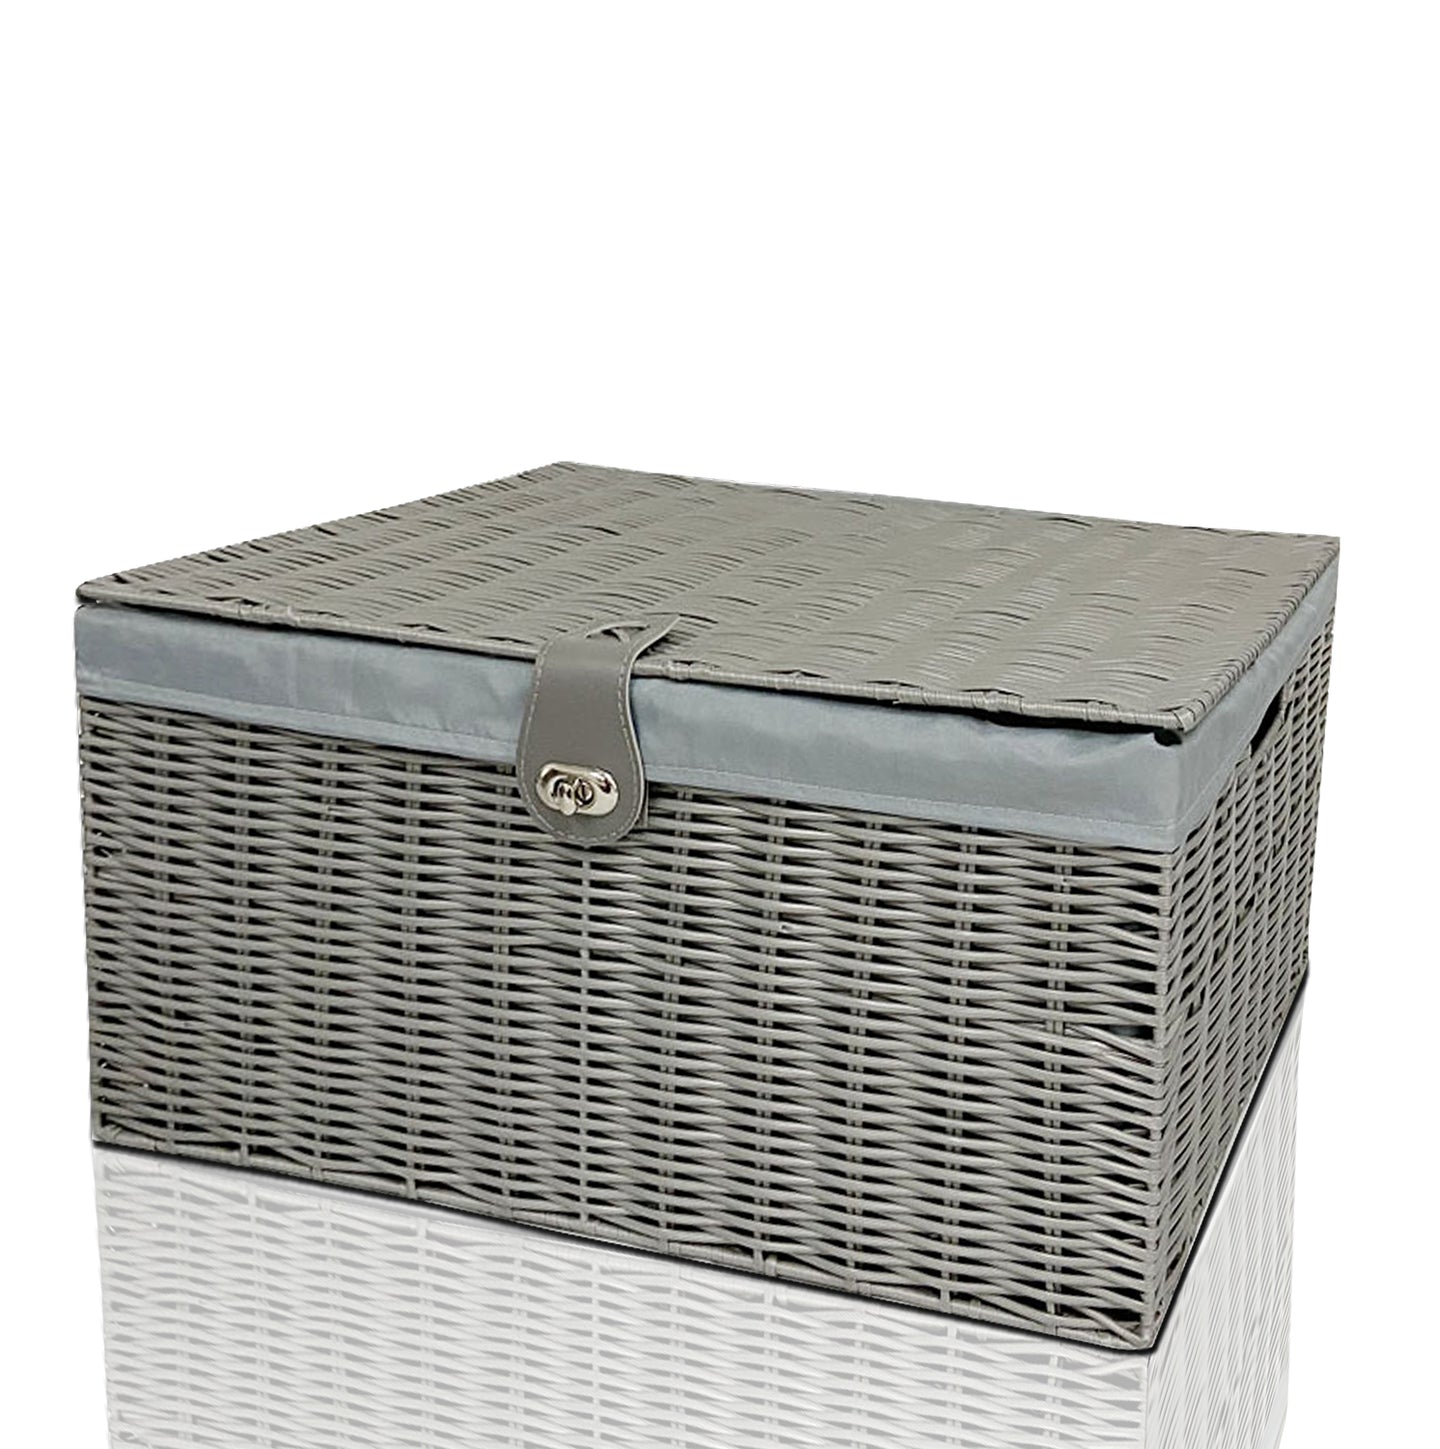 Clarisworld Resin Woven Hamper Basket Storage Chest Trunk Hamper/Kids Toy with Lid, Lock and Removable Lining, Grey W49 x D35 x H22cm